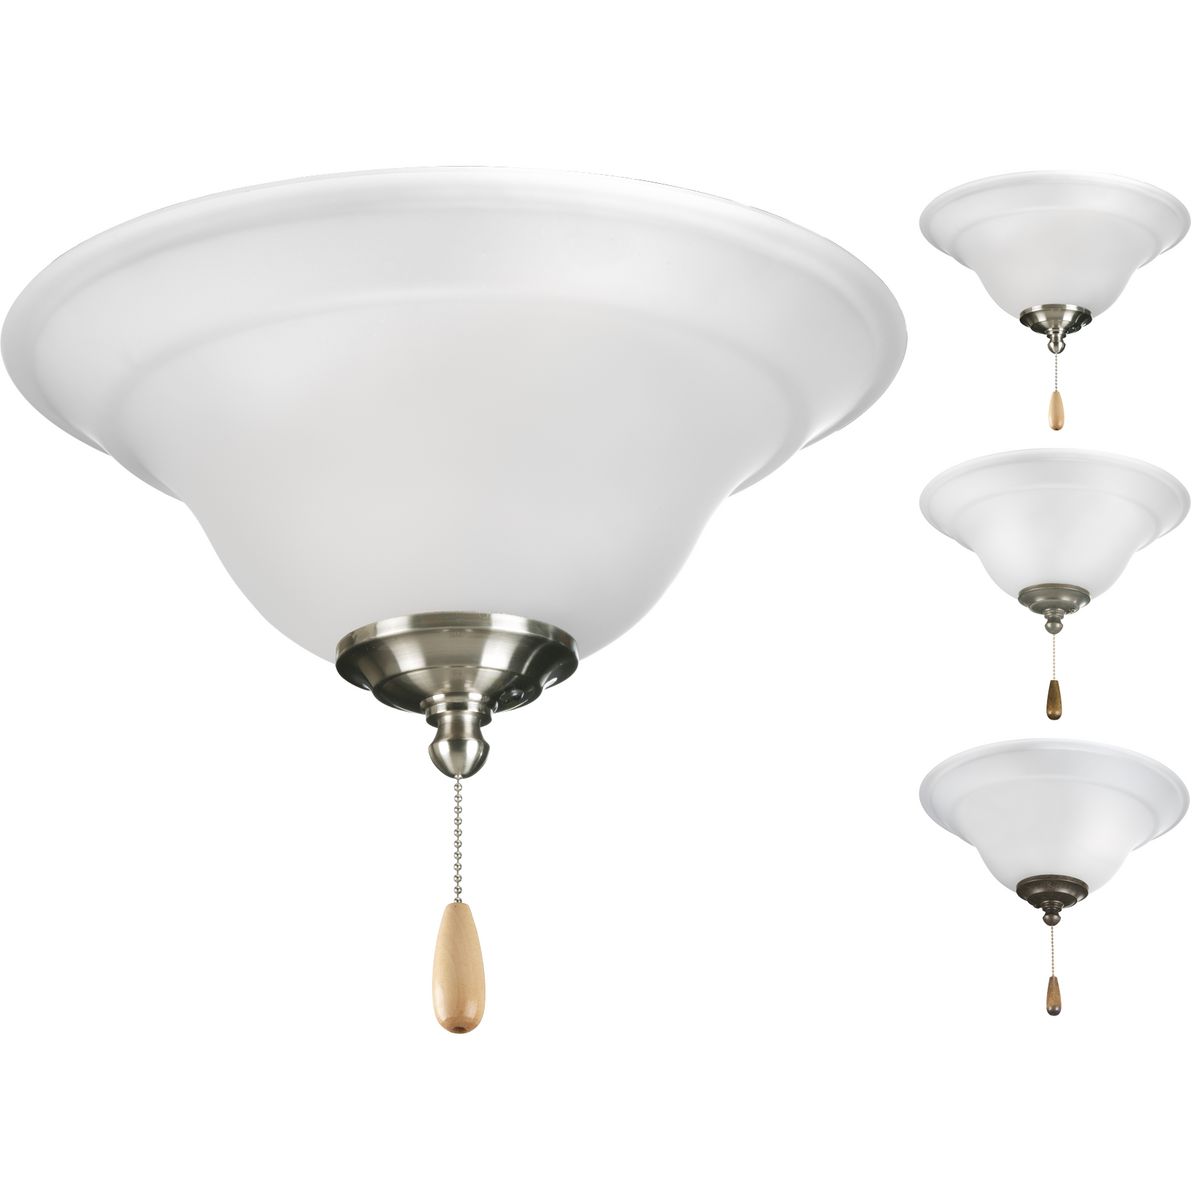 Two-light fan kit with an etched glass bowl from the Trinity Collection. Finials included are -09 Brushed Nickel, -20 Antique Bronze, -30 White and -77 Forged Bronze that match a variety of Progress Lighting fans. Quick-connect wiring makes it easy to install to a fan that accept an accessory light. Gracefully exotic, the Trinity Collection offers classic sophistication for interiors. Includes two 3000K, 800 lumen each (source), Title 24 certified LED bulbs.